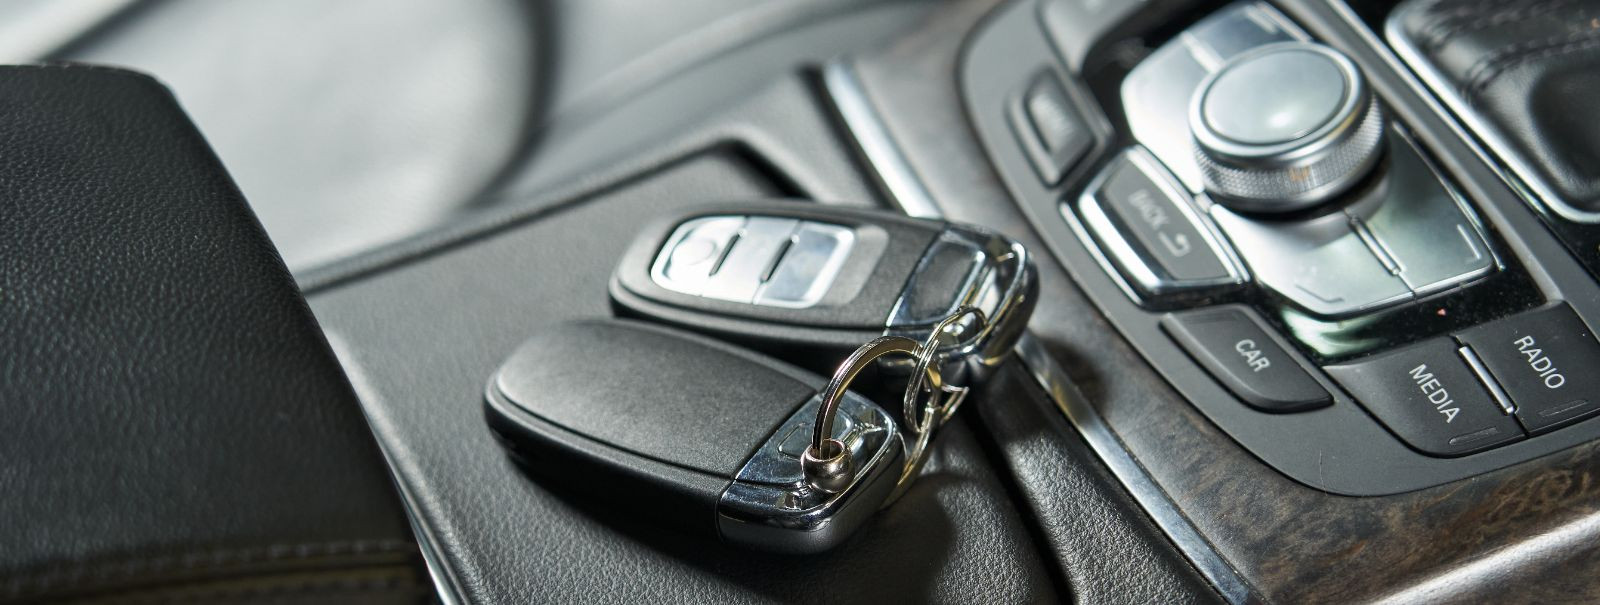 Every car owner knows the importance of a reliable car key, but not everyone recognizes when it's time for a replacement. Ignoring the signs can lead to inconve